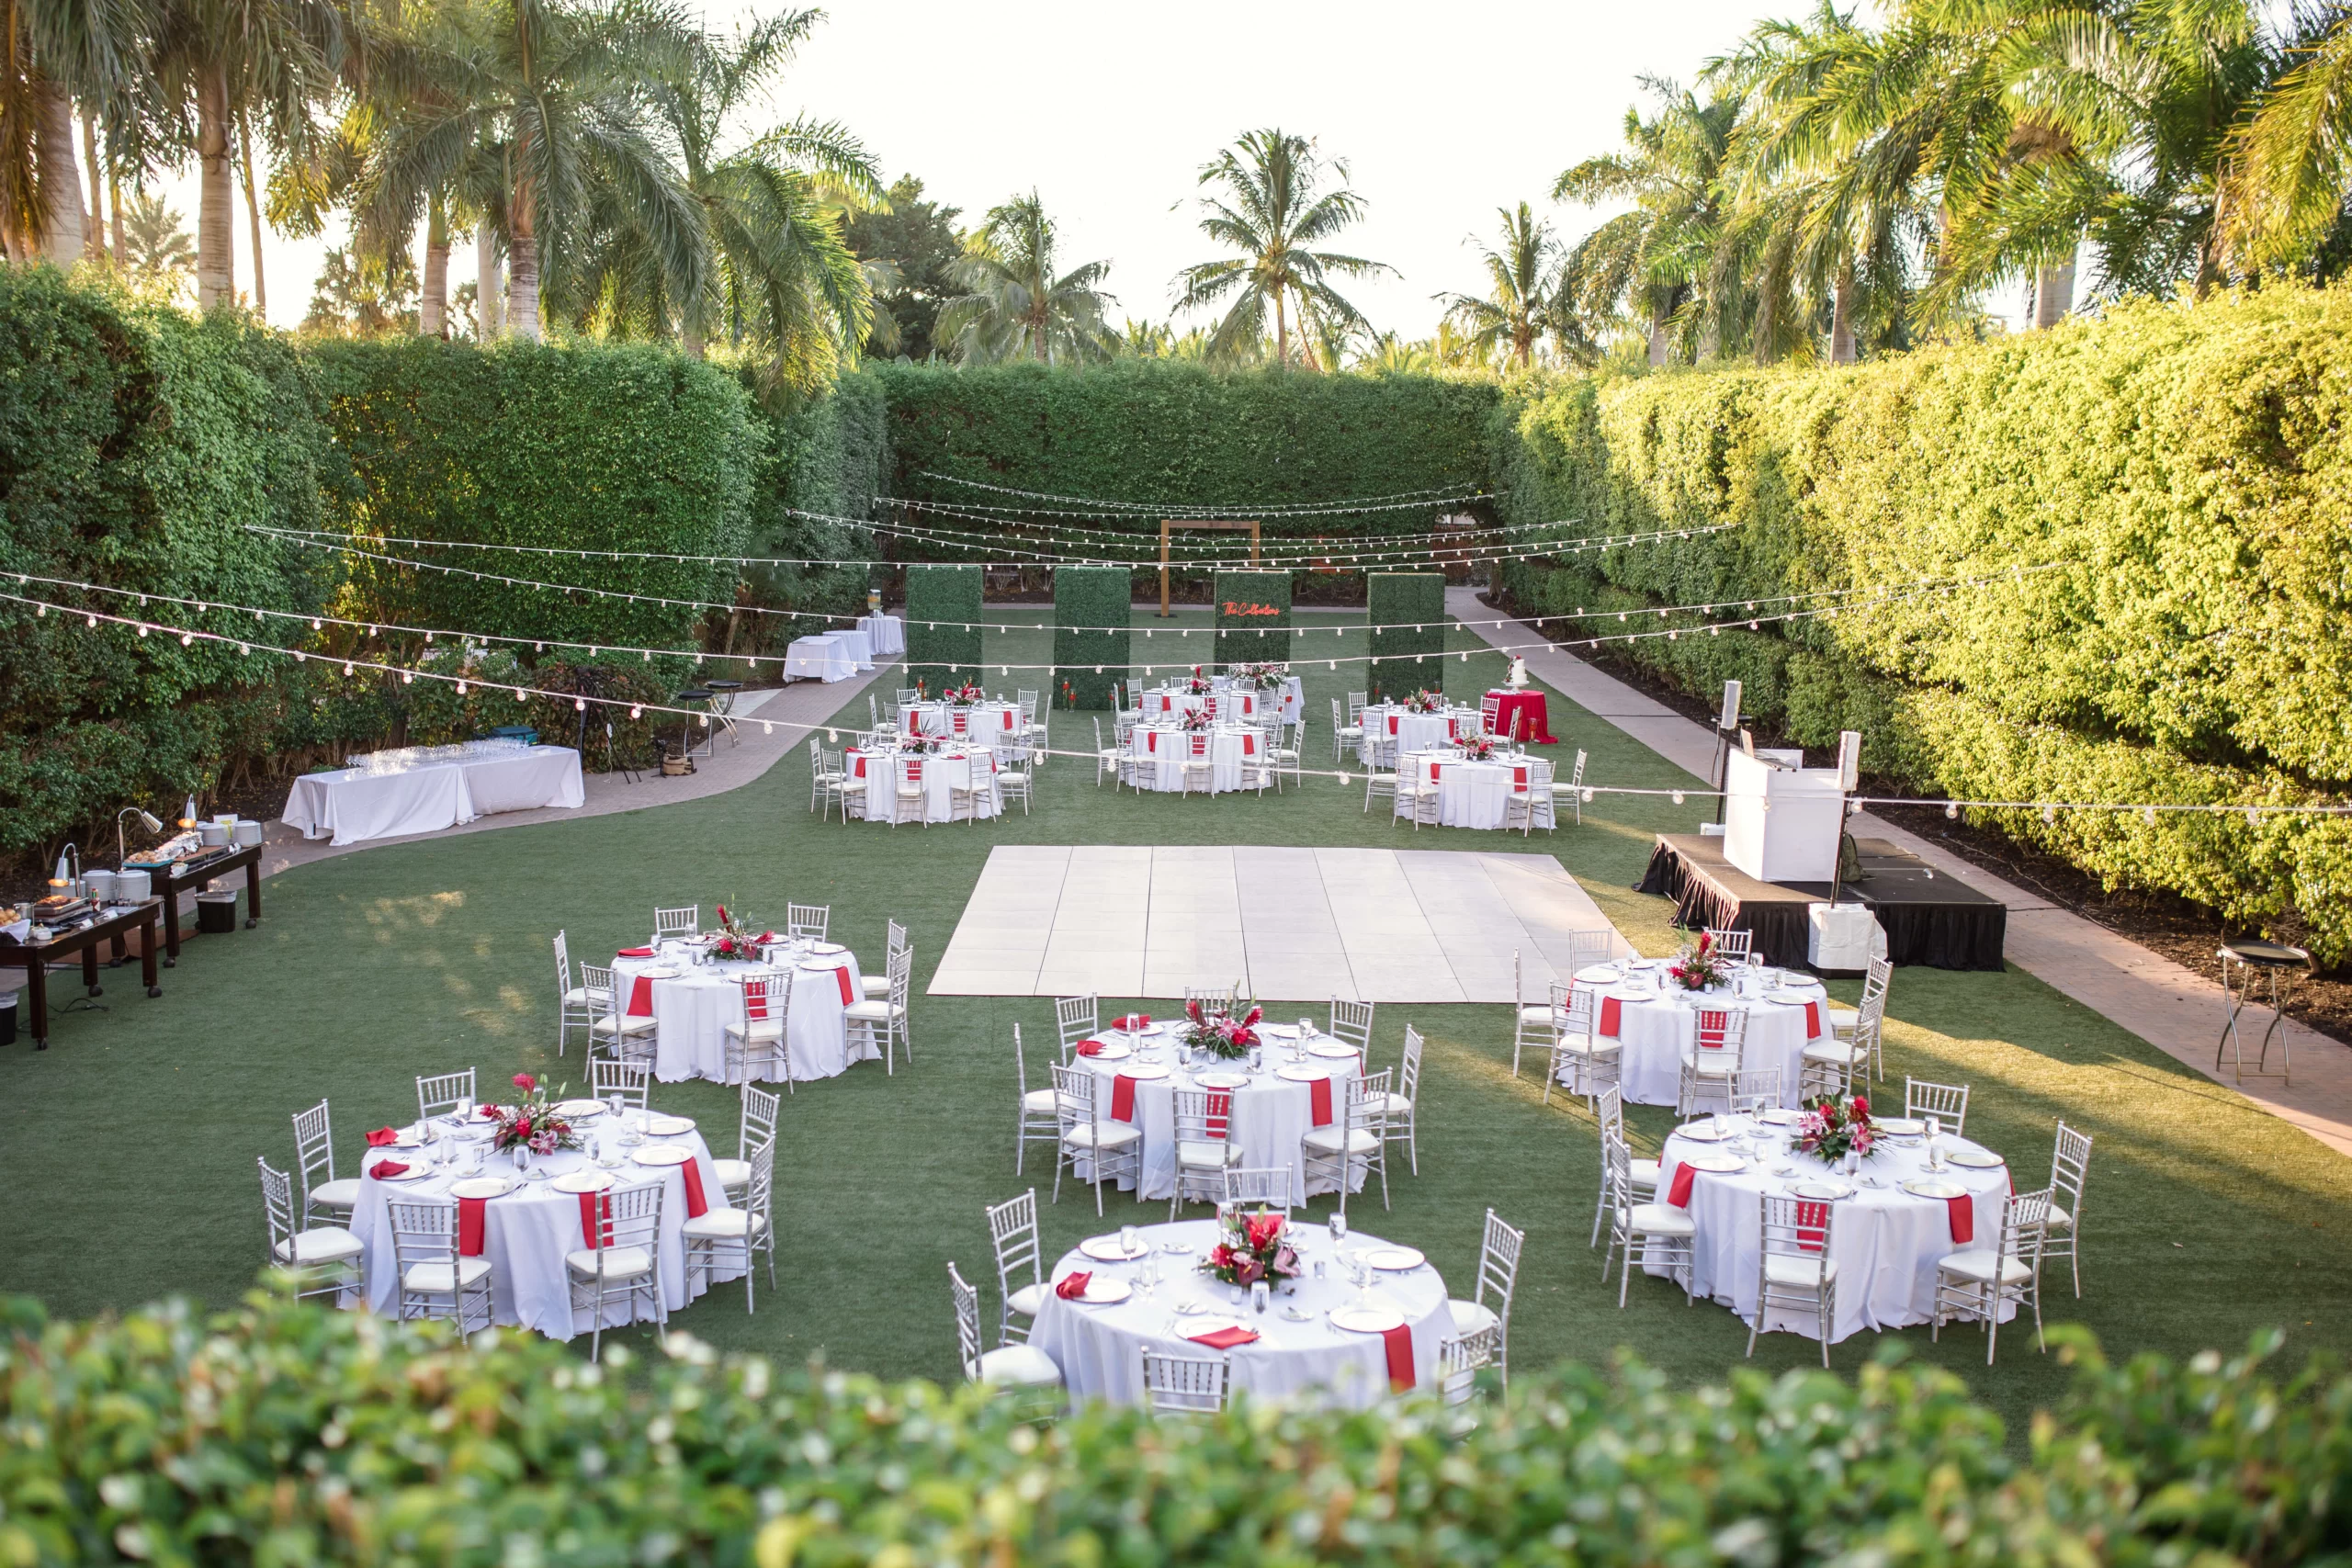 Full view of reception with ceremony behind hedge walls at The Hyatt Regency Coconut Point in Bonita Springs, FL